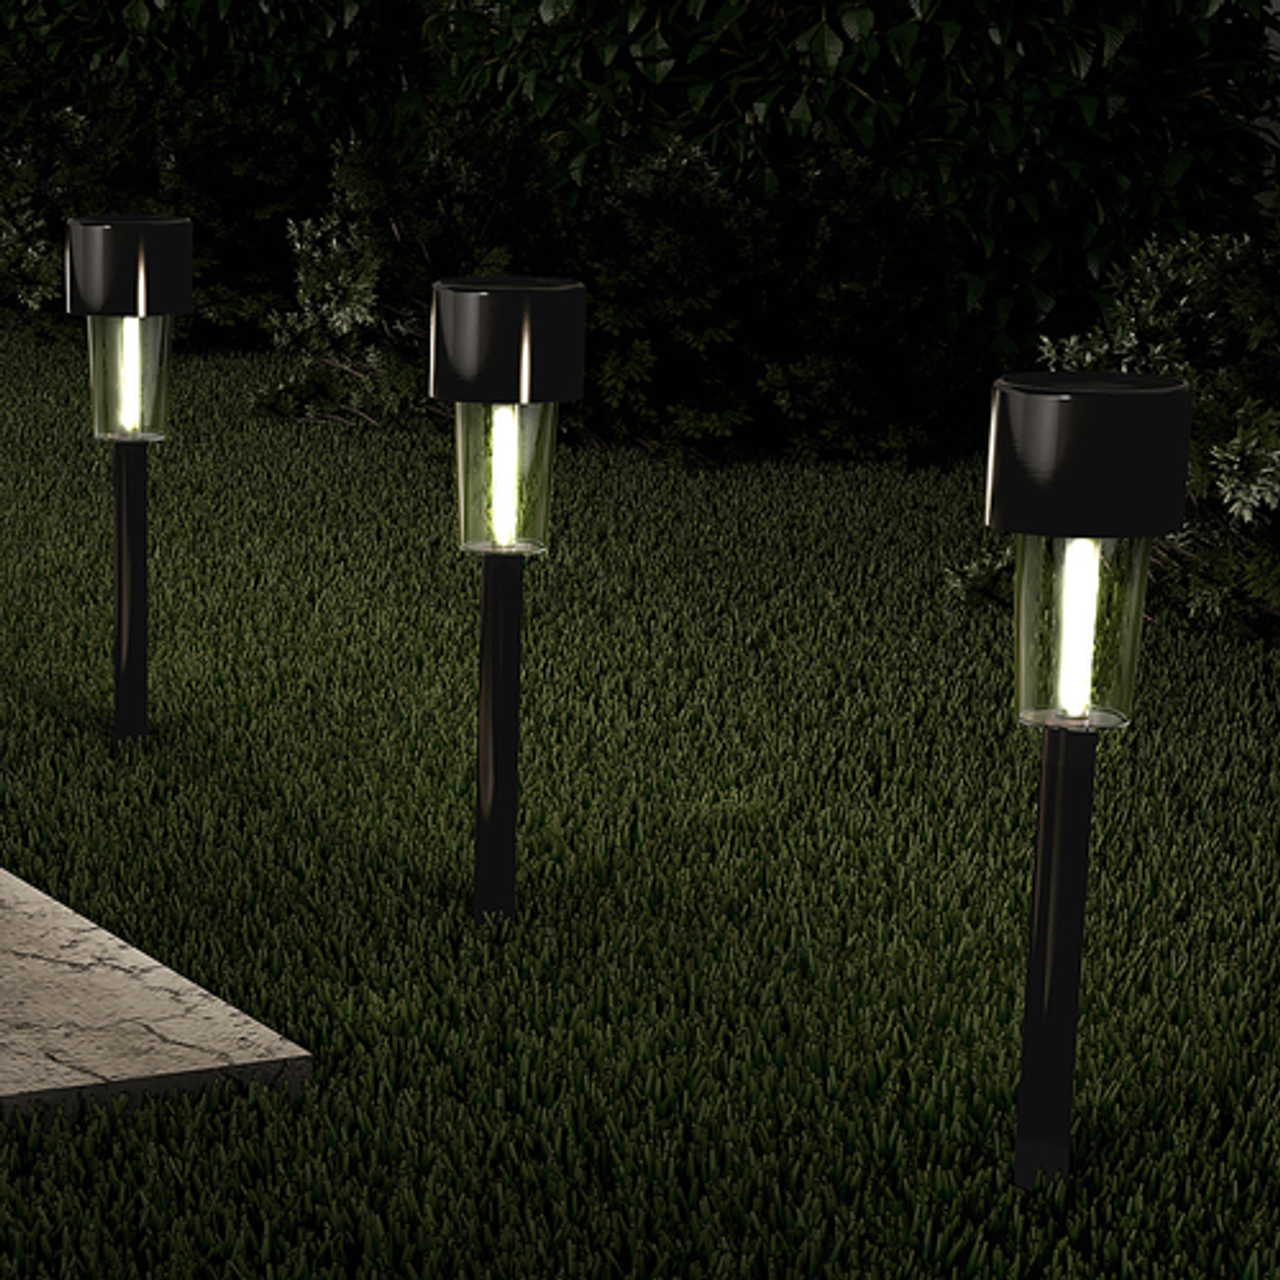 Nature Spring - Solar Path Lights - 12.2” Stainless Steel Outdoor Stake Lighting for Garden, Landscape, Driveway, Walkway - Set of 12 - Black